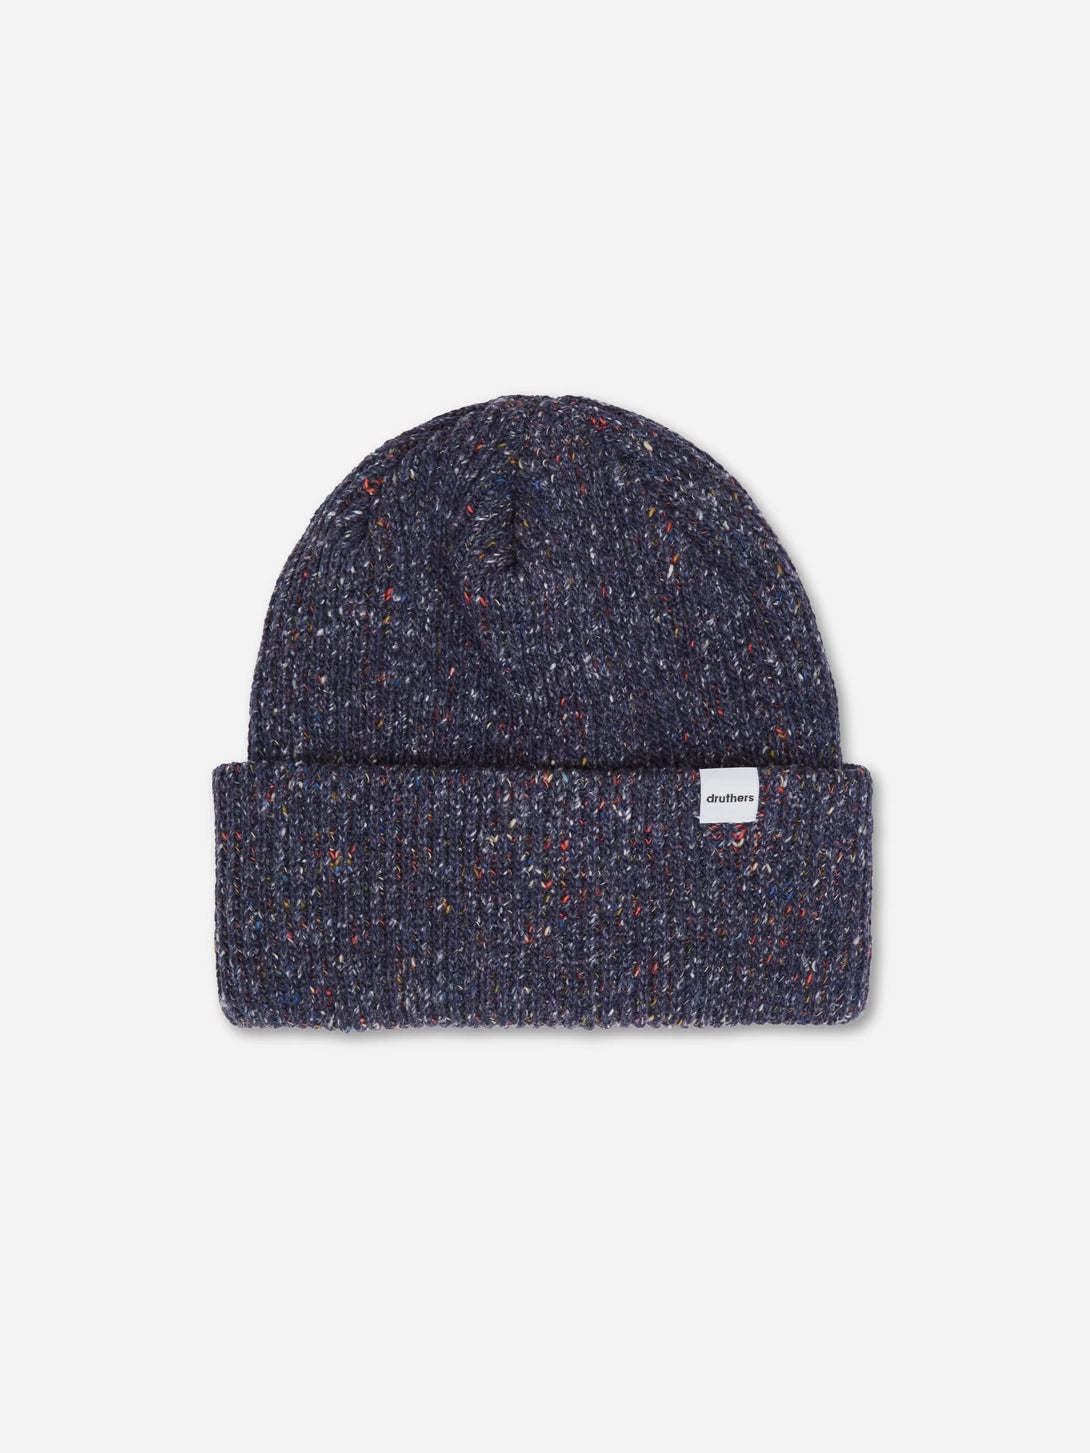 Navy Melange Recycled Cotton Beanie Druthers